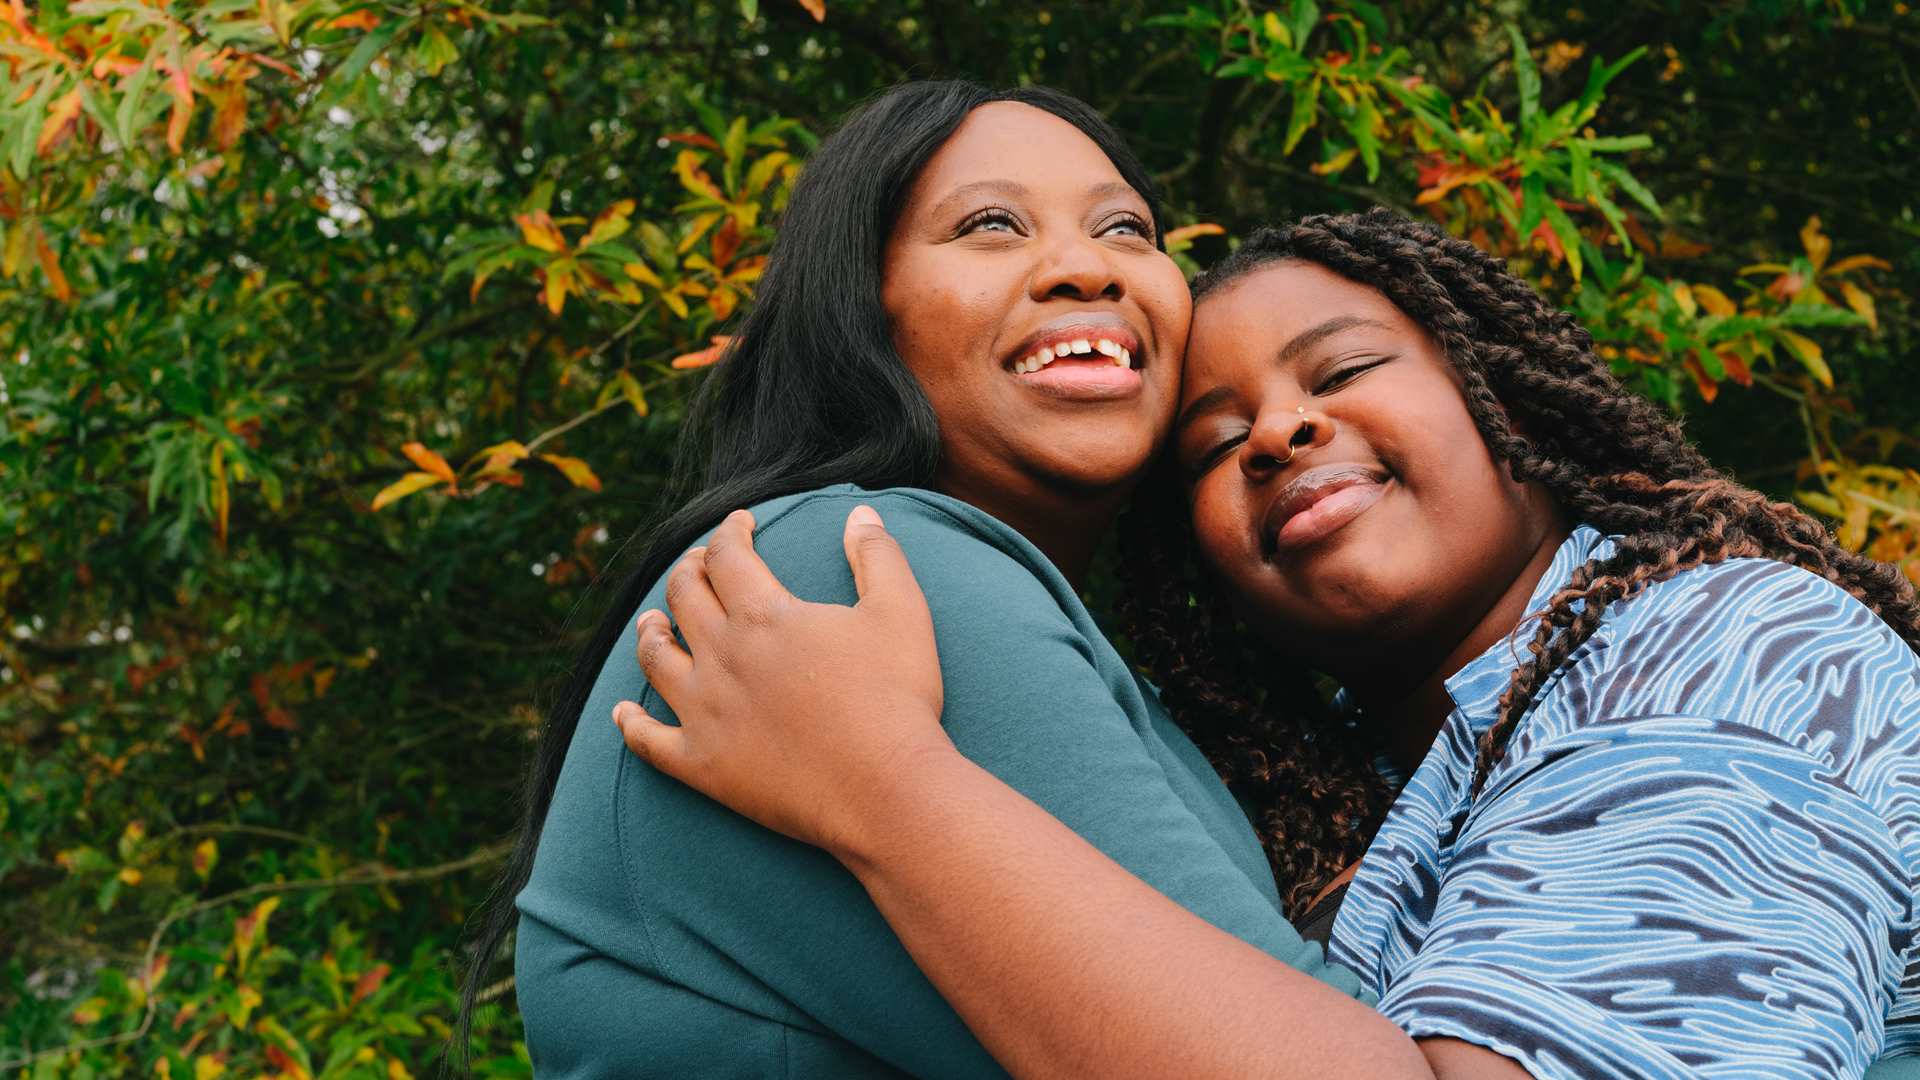 A young Black woman hugging an older Black woman in the park on a bench. They are both smiling.